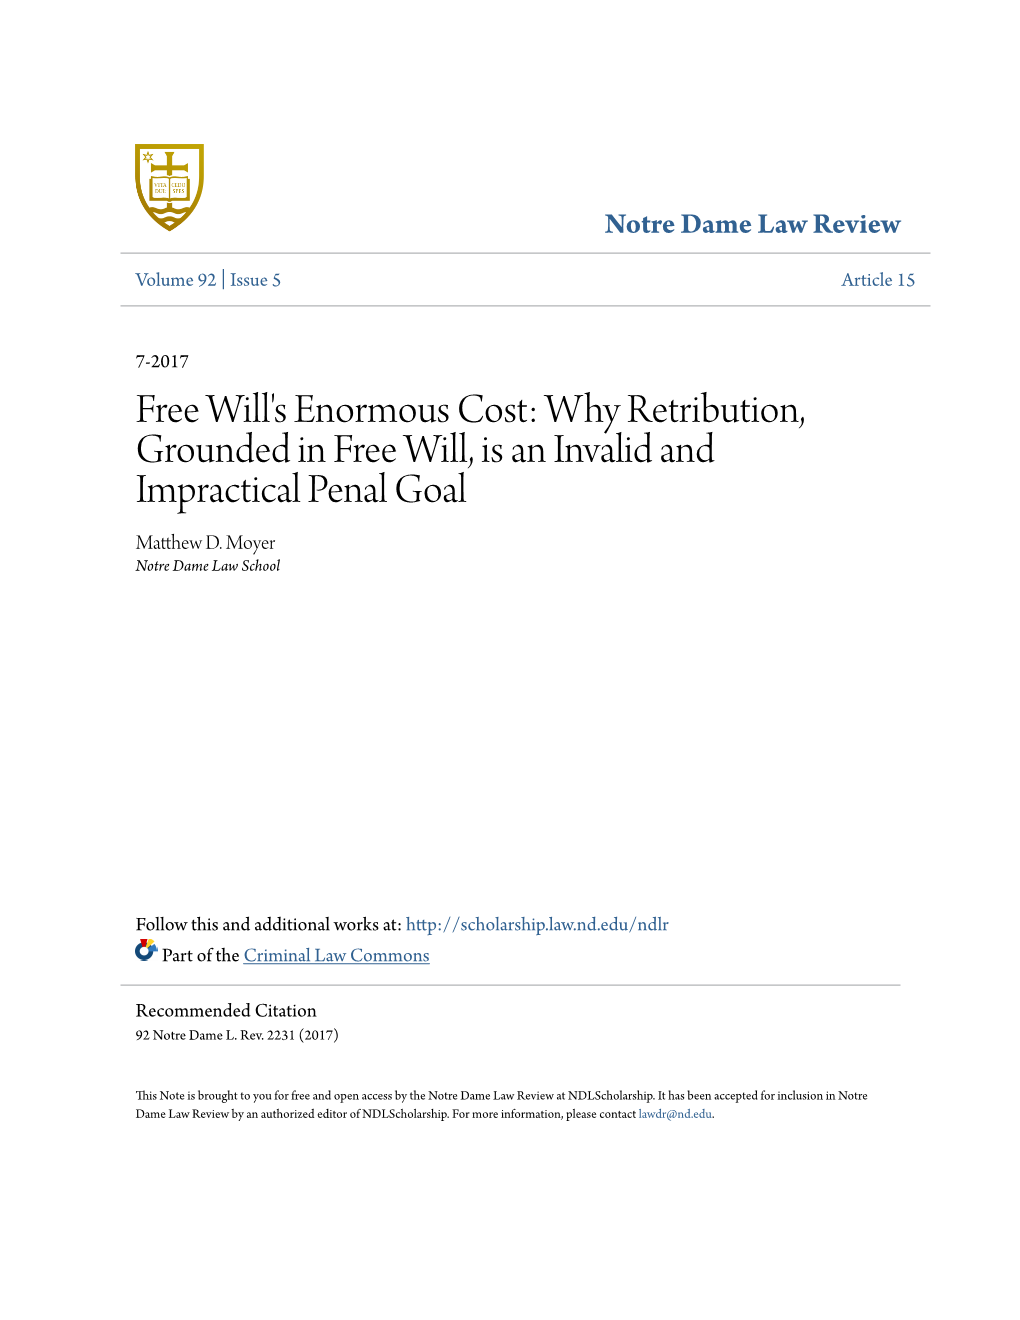 Why Retribution, Grounded in Free Will, Is an Invalid and Impractical Penal Goal Matthew .D Moyer Notre Dame Law School